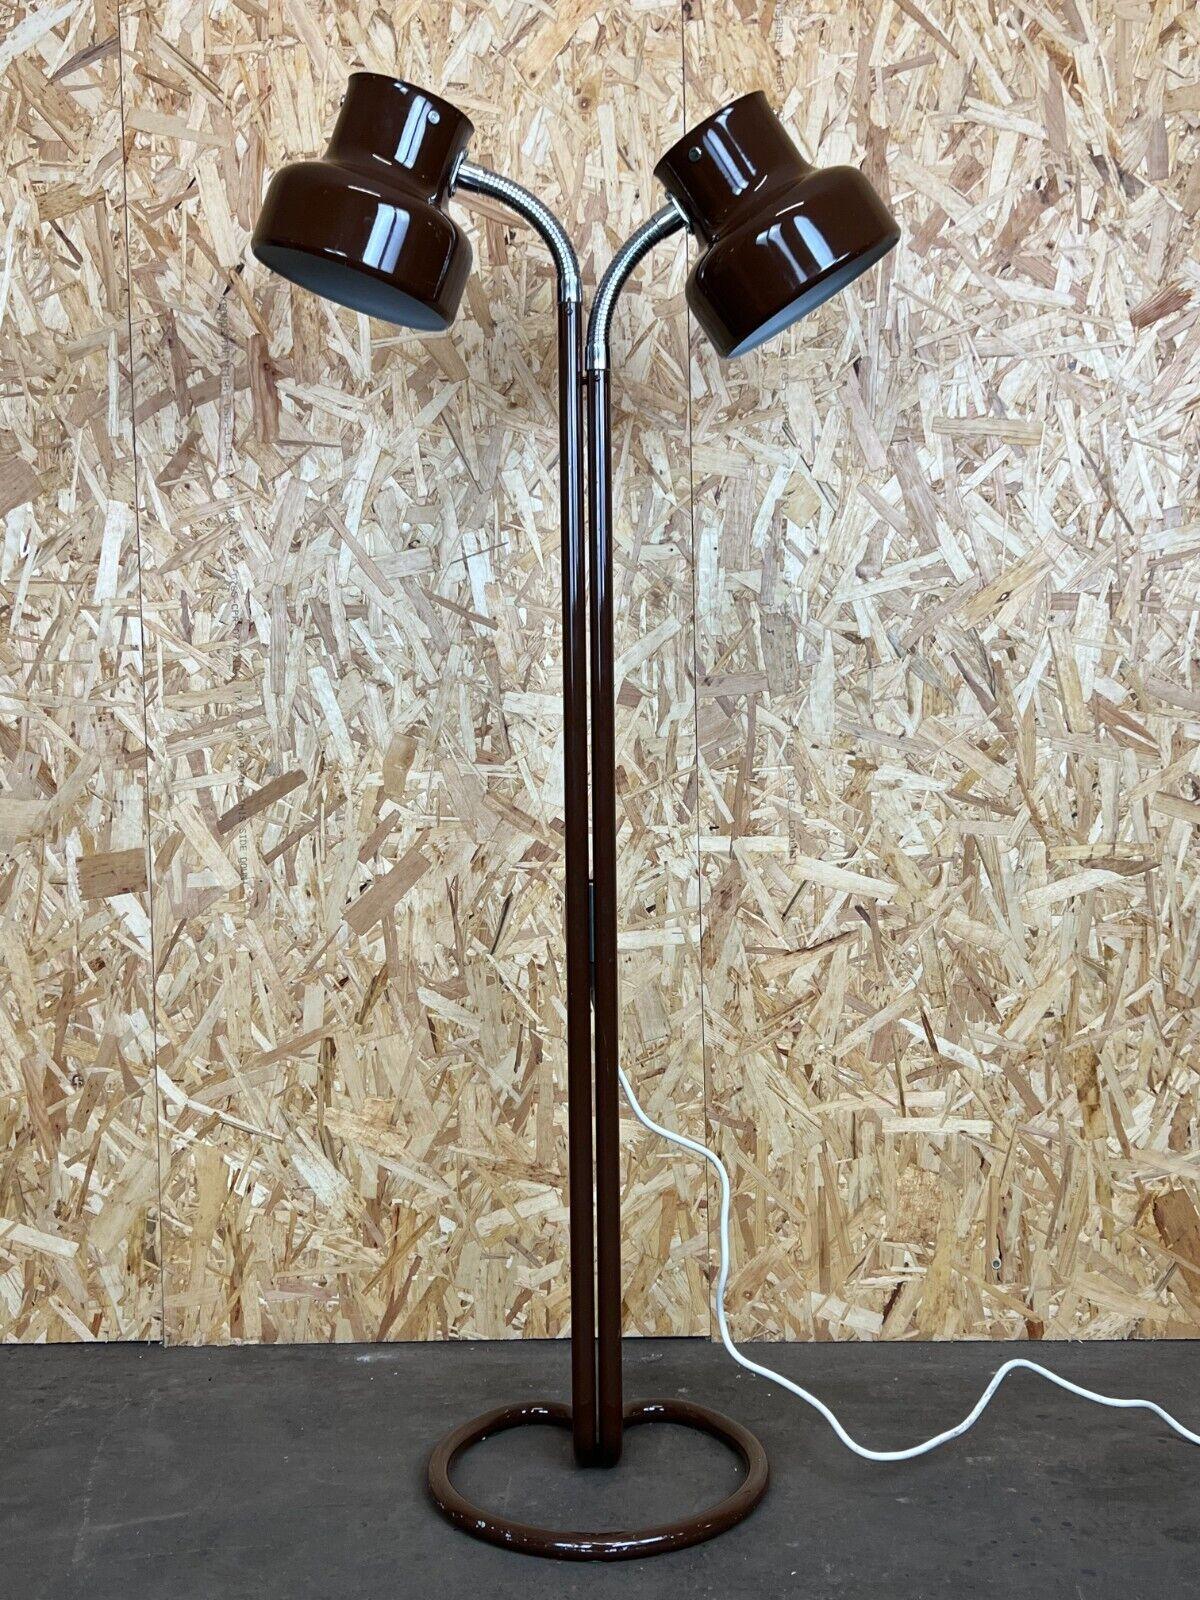 1960s 1970s Bumling floor lamp by Anders Pehrson for Ateljé Lyktan Metall

Object: floor lamp

Manufacturer: Atelje Lyktan

Condition: good

Age: around 1960-1970

Dimensions:

Width = 58cm
Depth = 31.5cm
Height = 127.5cm

Other